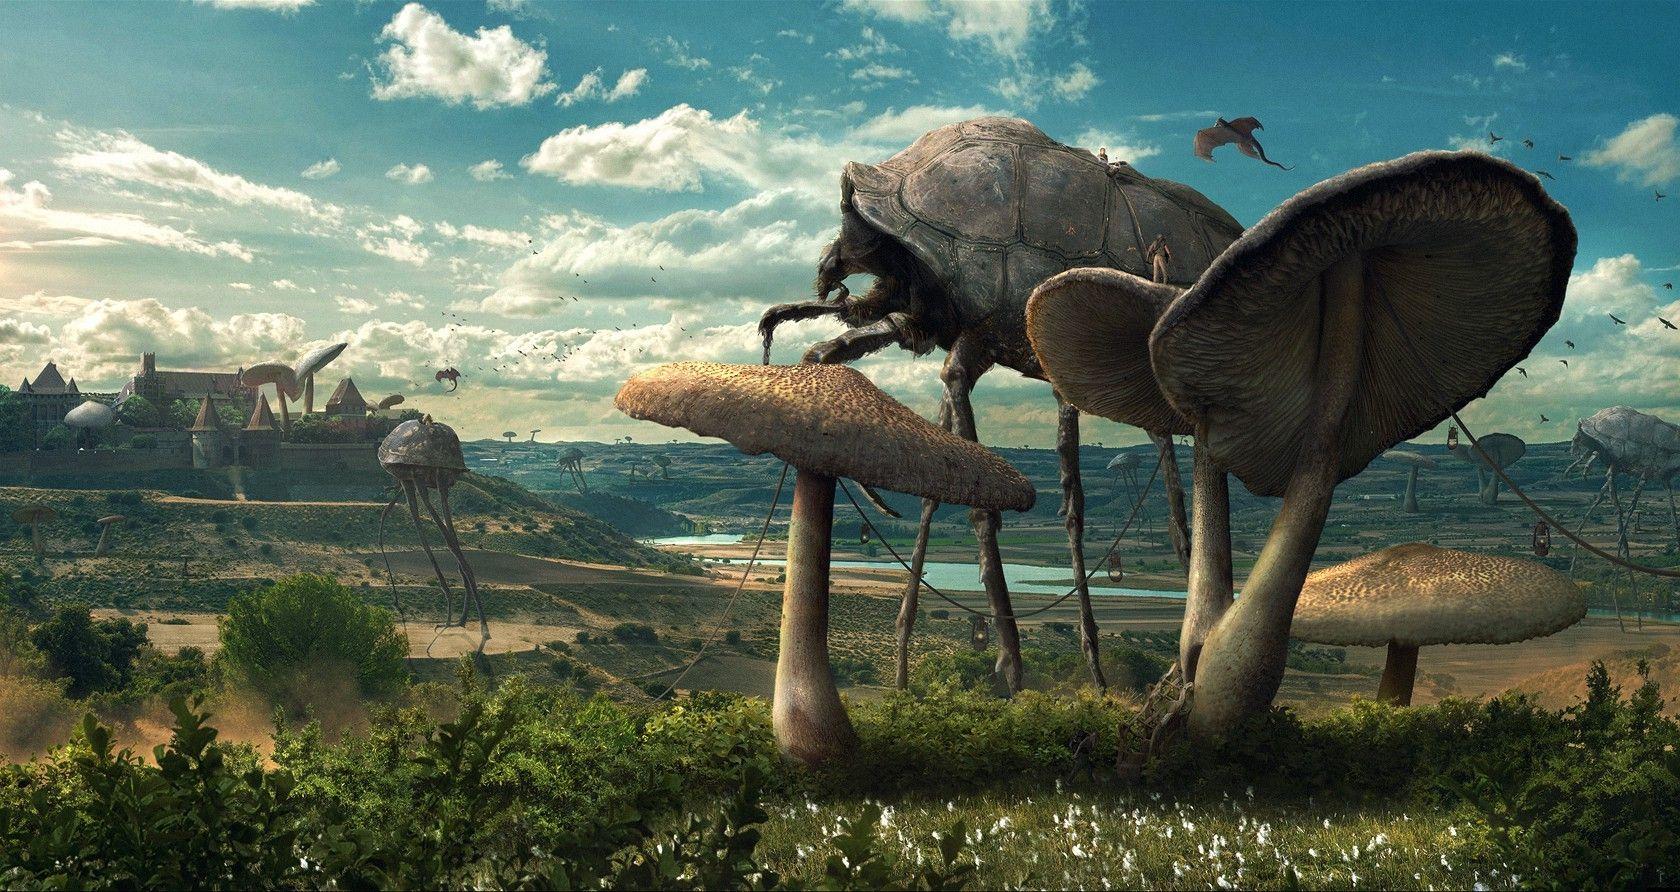 Wallpaper, 1680x892 px, coexist, insect, nature, Parasite, science